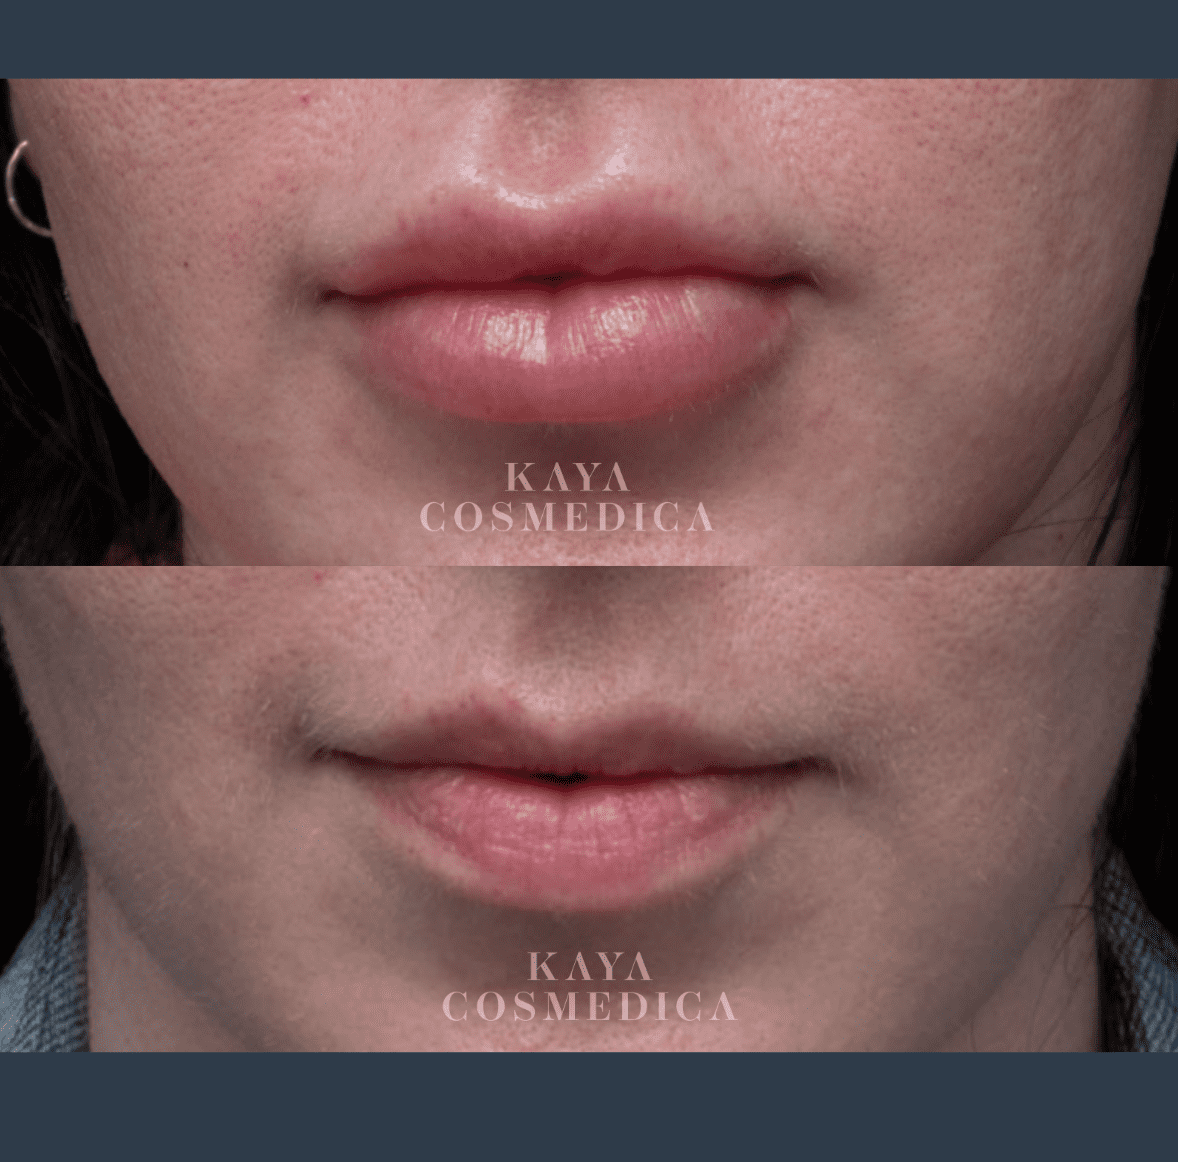 Close-up of a woman's lips before and after dermal filler treatment, shown in a split comparison. The top image displays slightly thinner lips, while the bottom image shows fuller lips with the logo